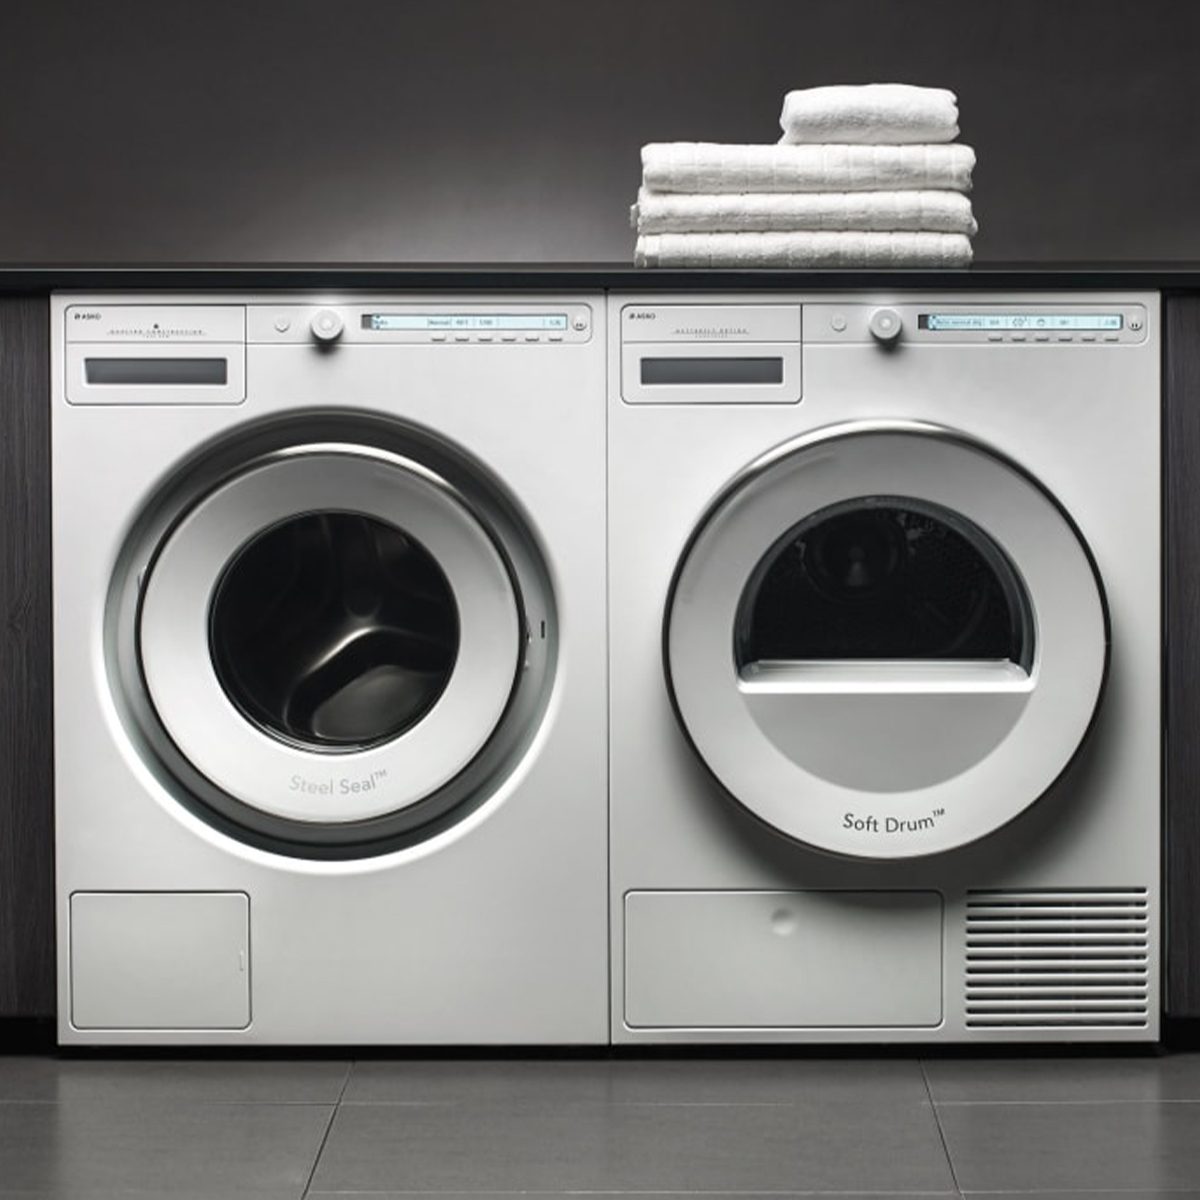 5 Most Reliable Brands of Washers and Dryers, According to Repairmnen